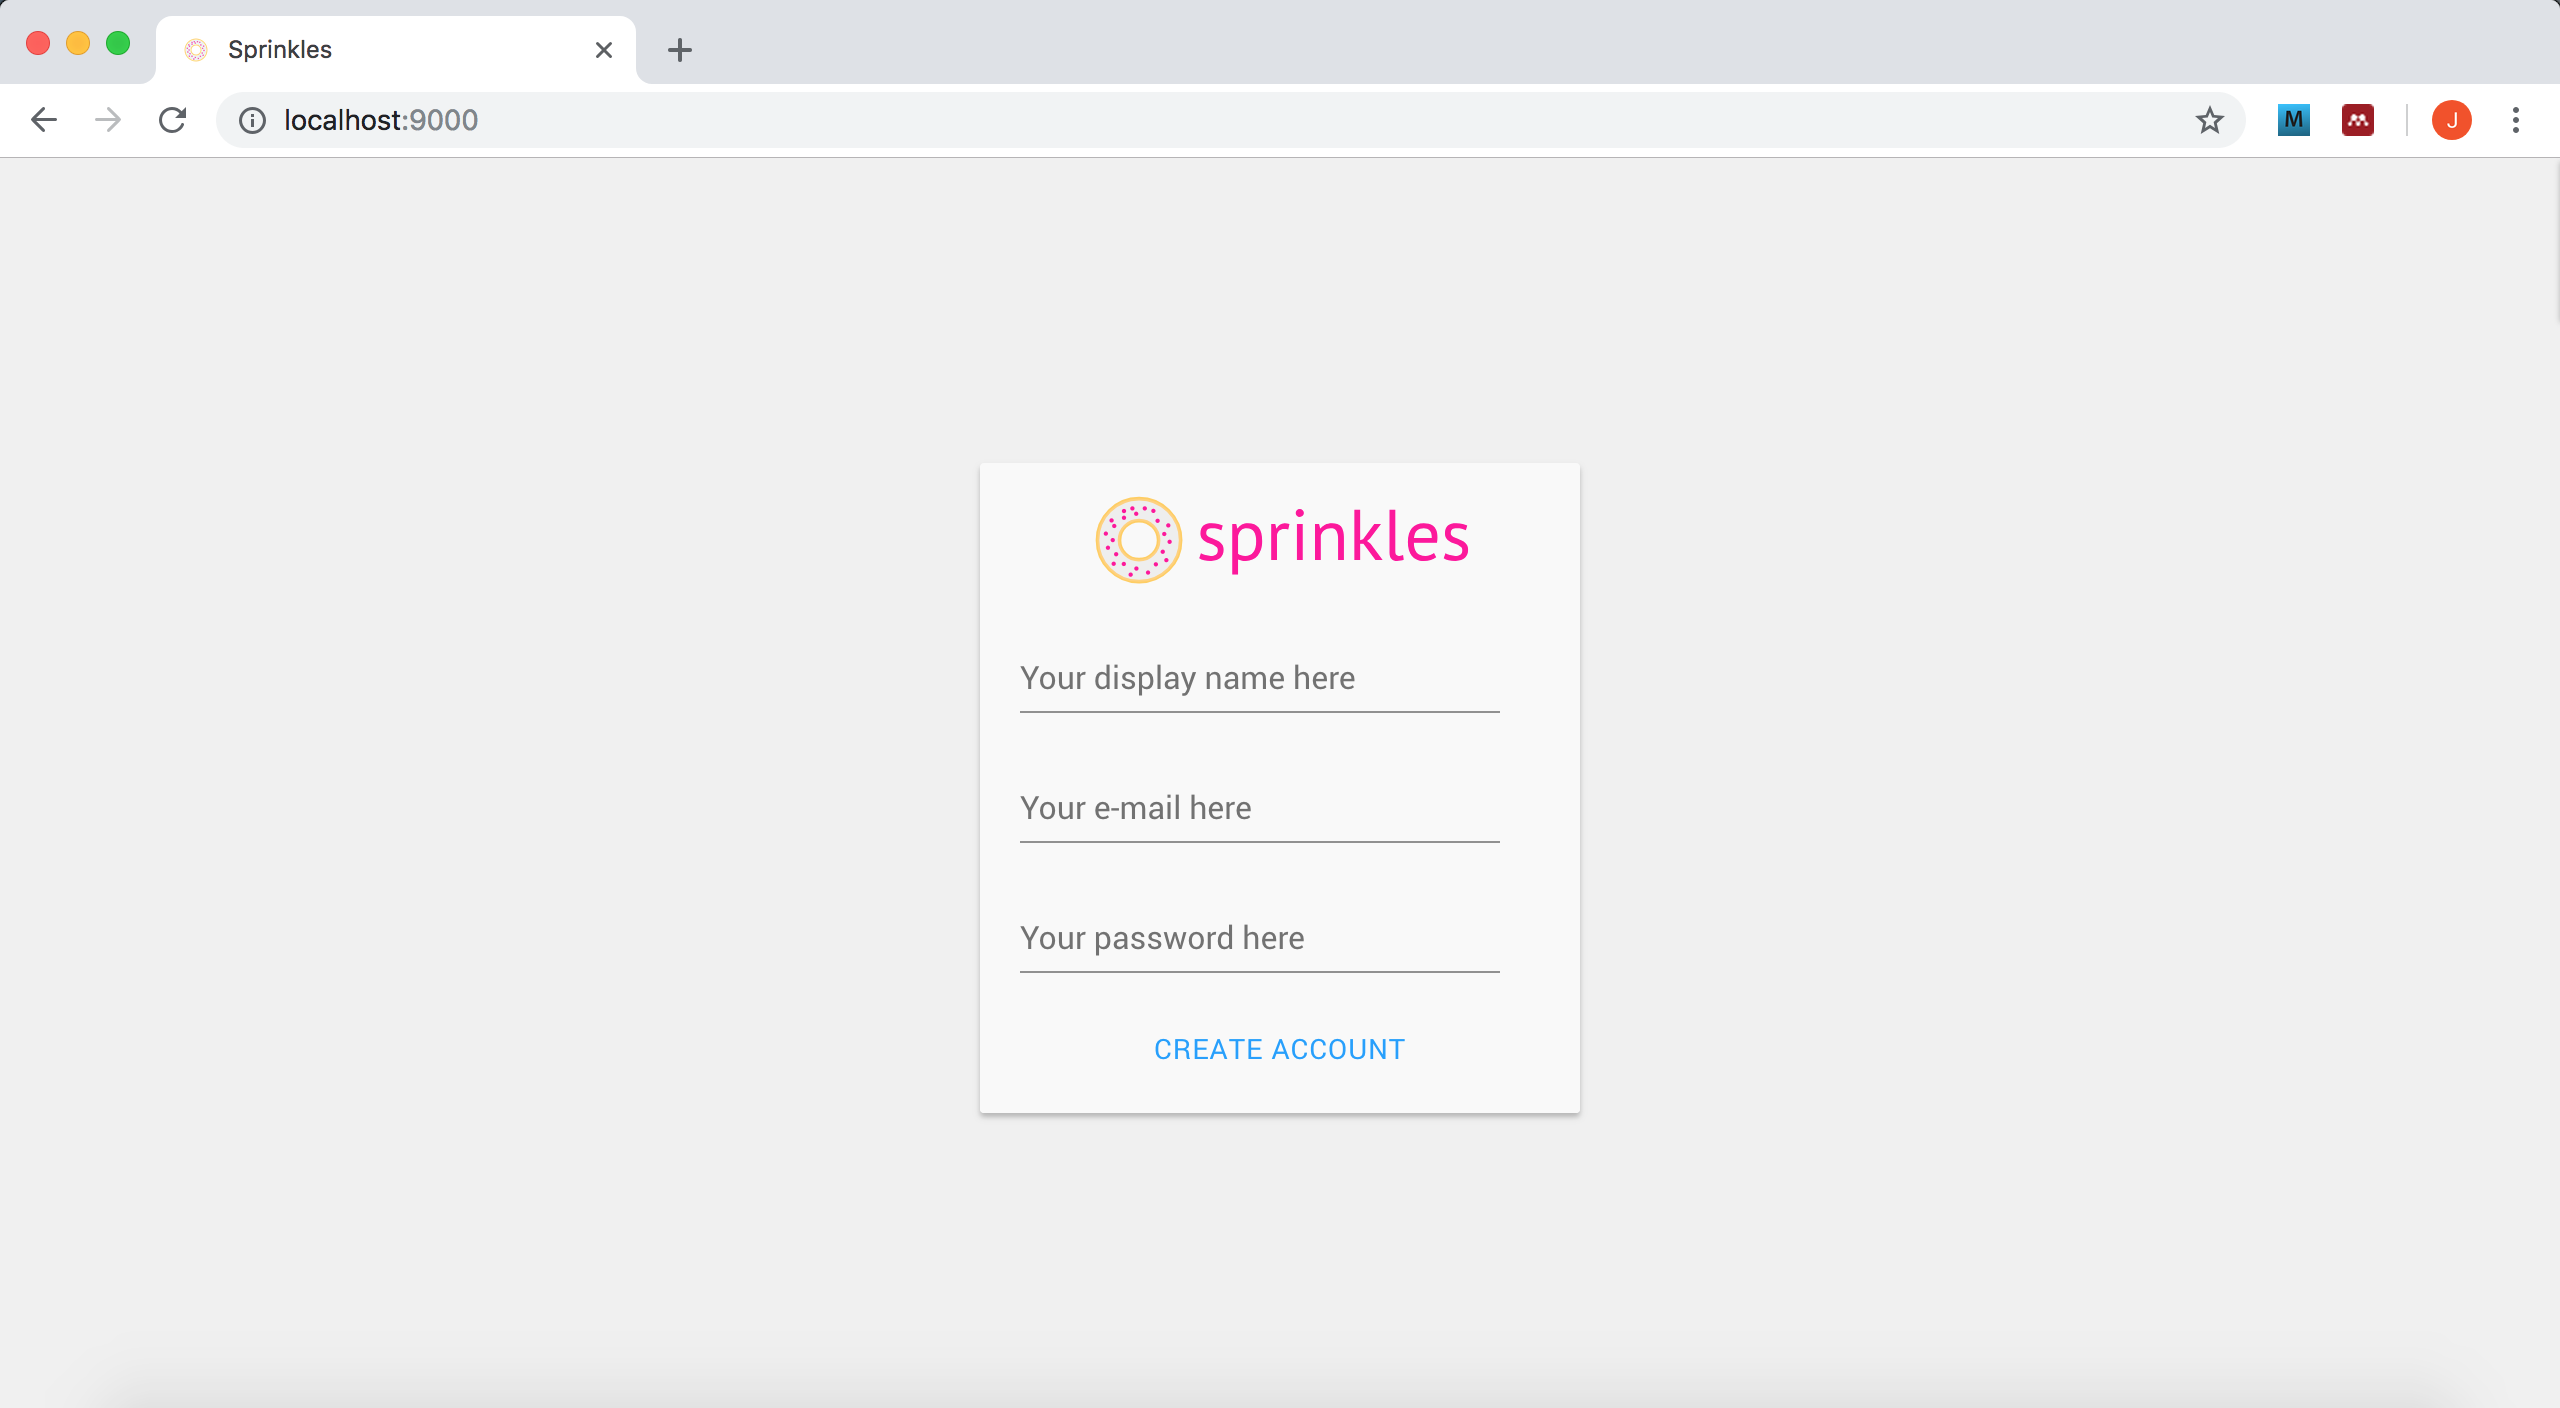 Registration page with Material design